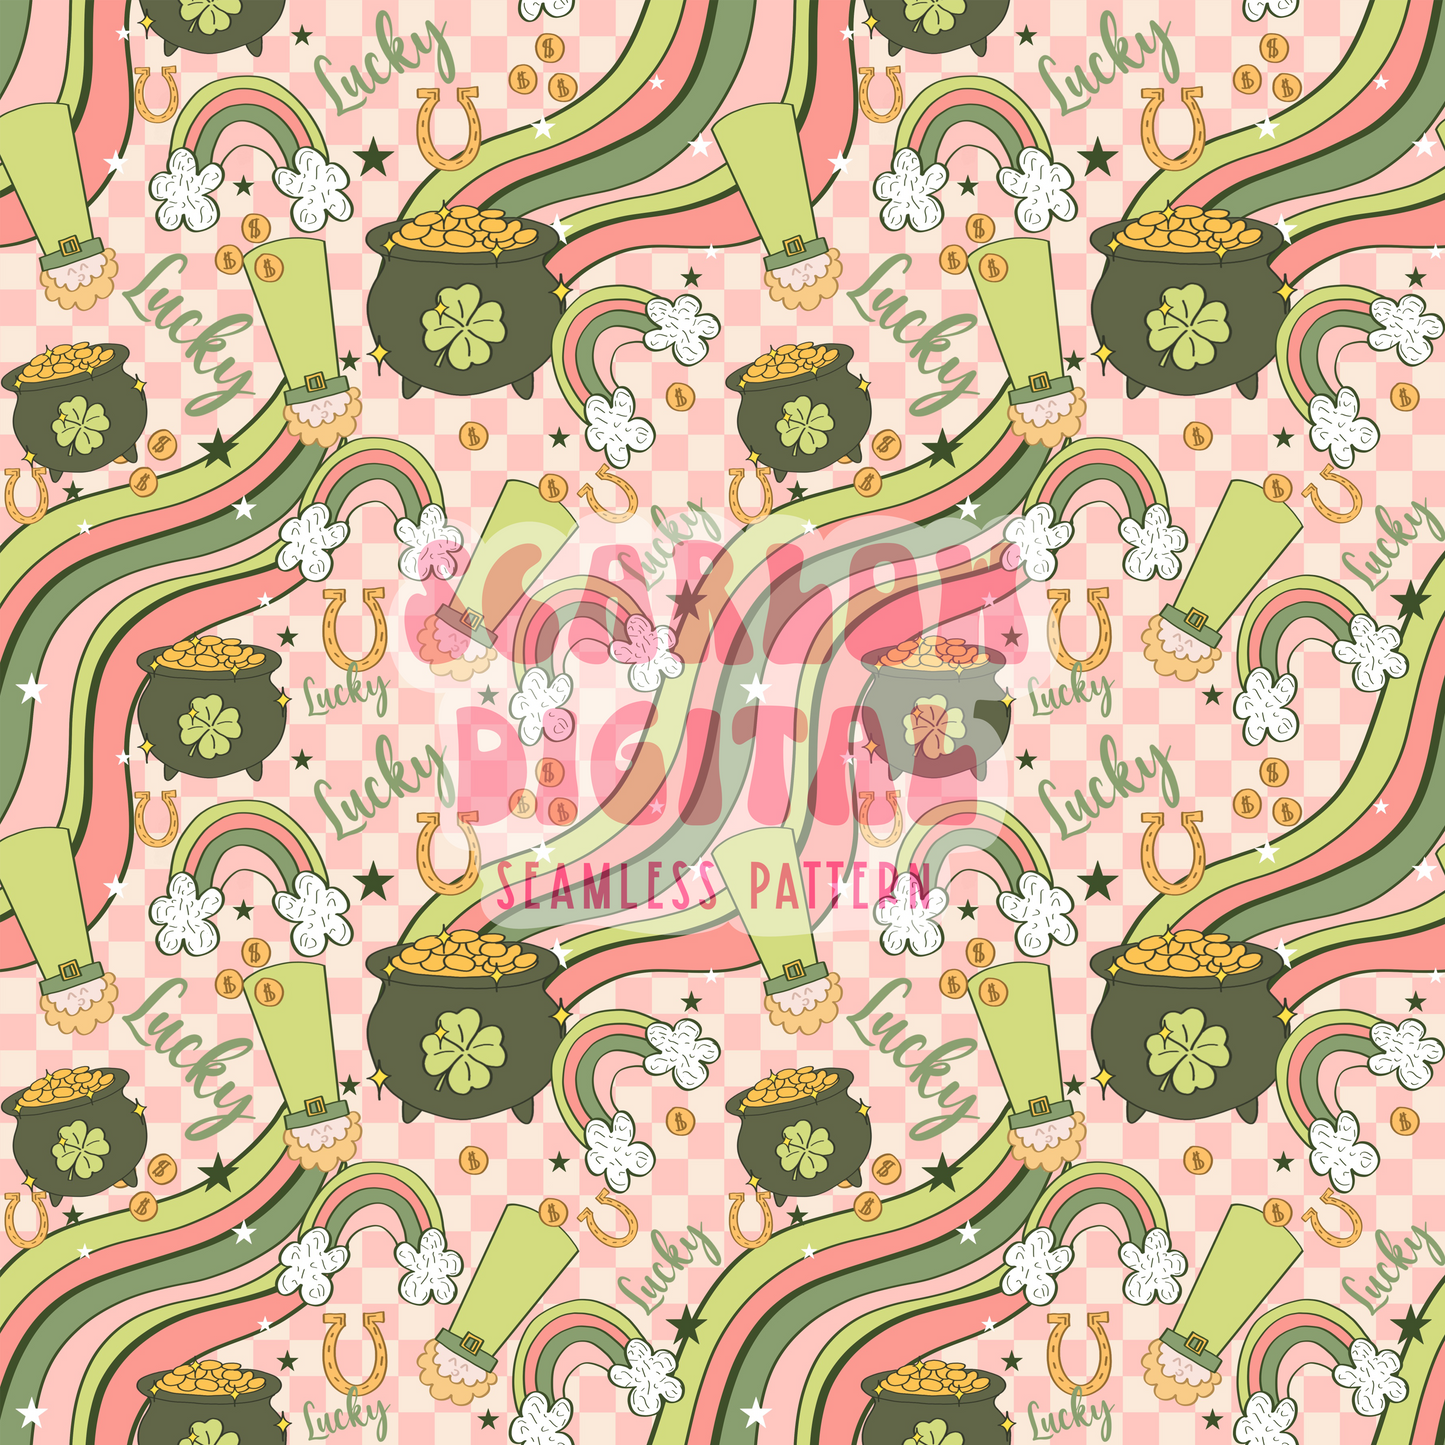 Lucky Rainbow Seamless Pattern-Saint Patty's Day Sublimation Digital Design Download- leprechaun seamless pattern, lucky girl seamless file